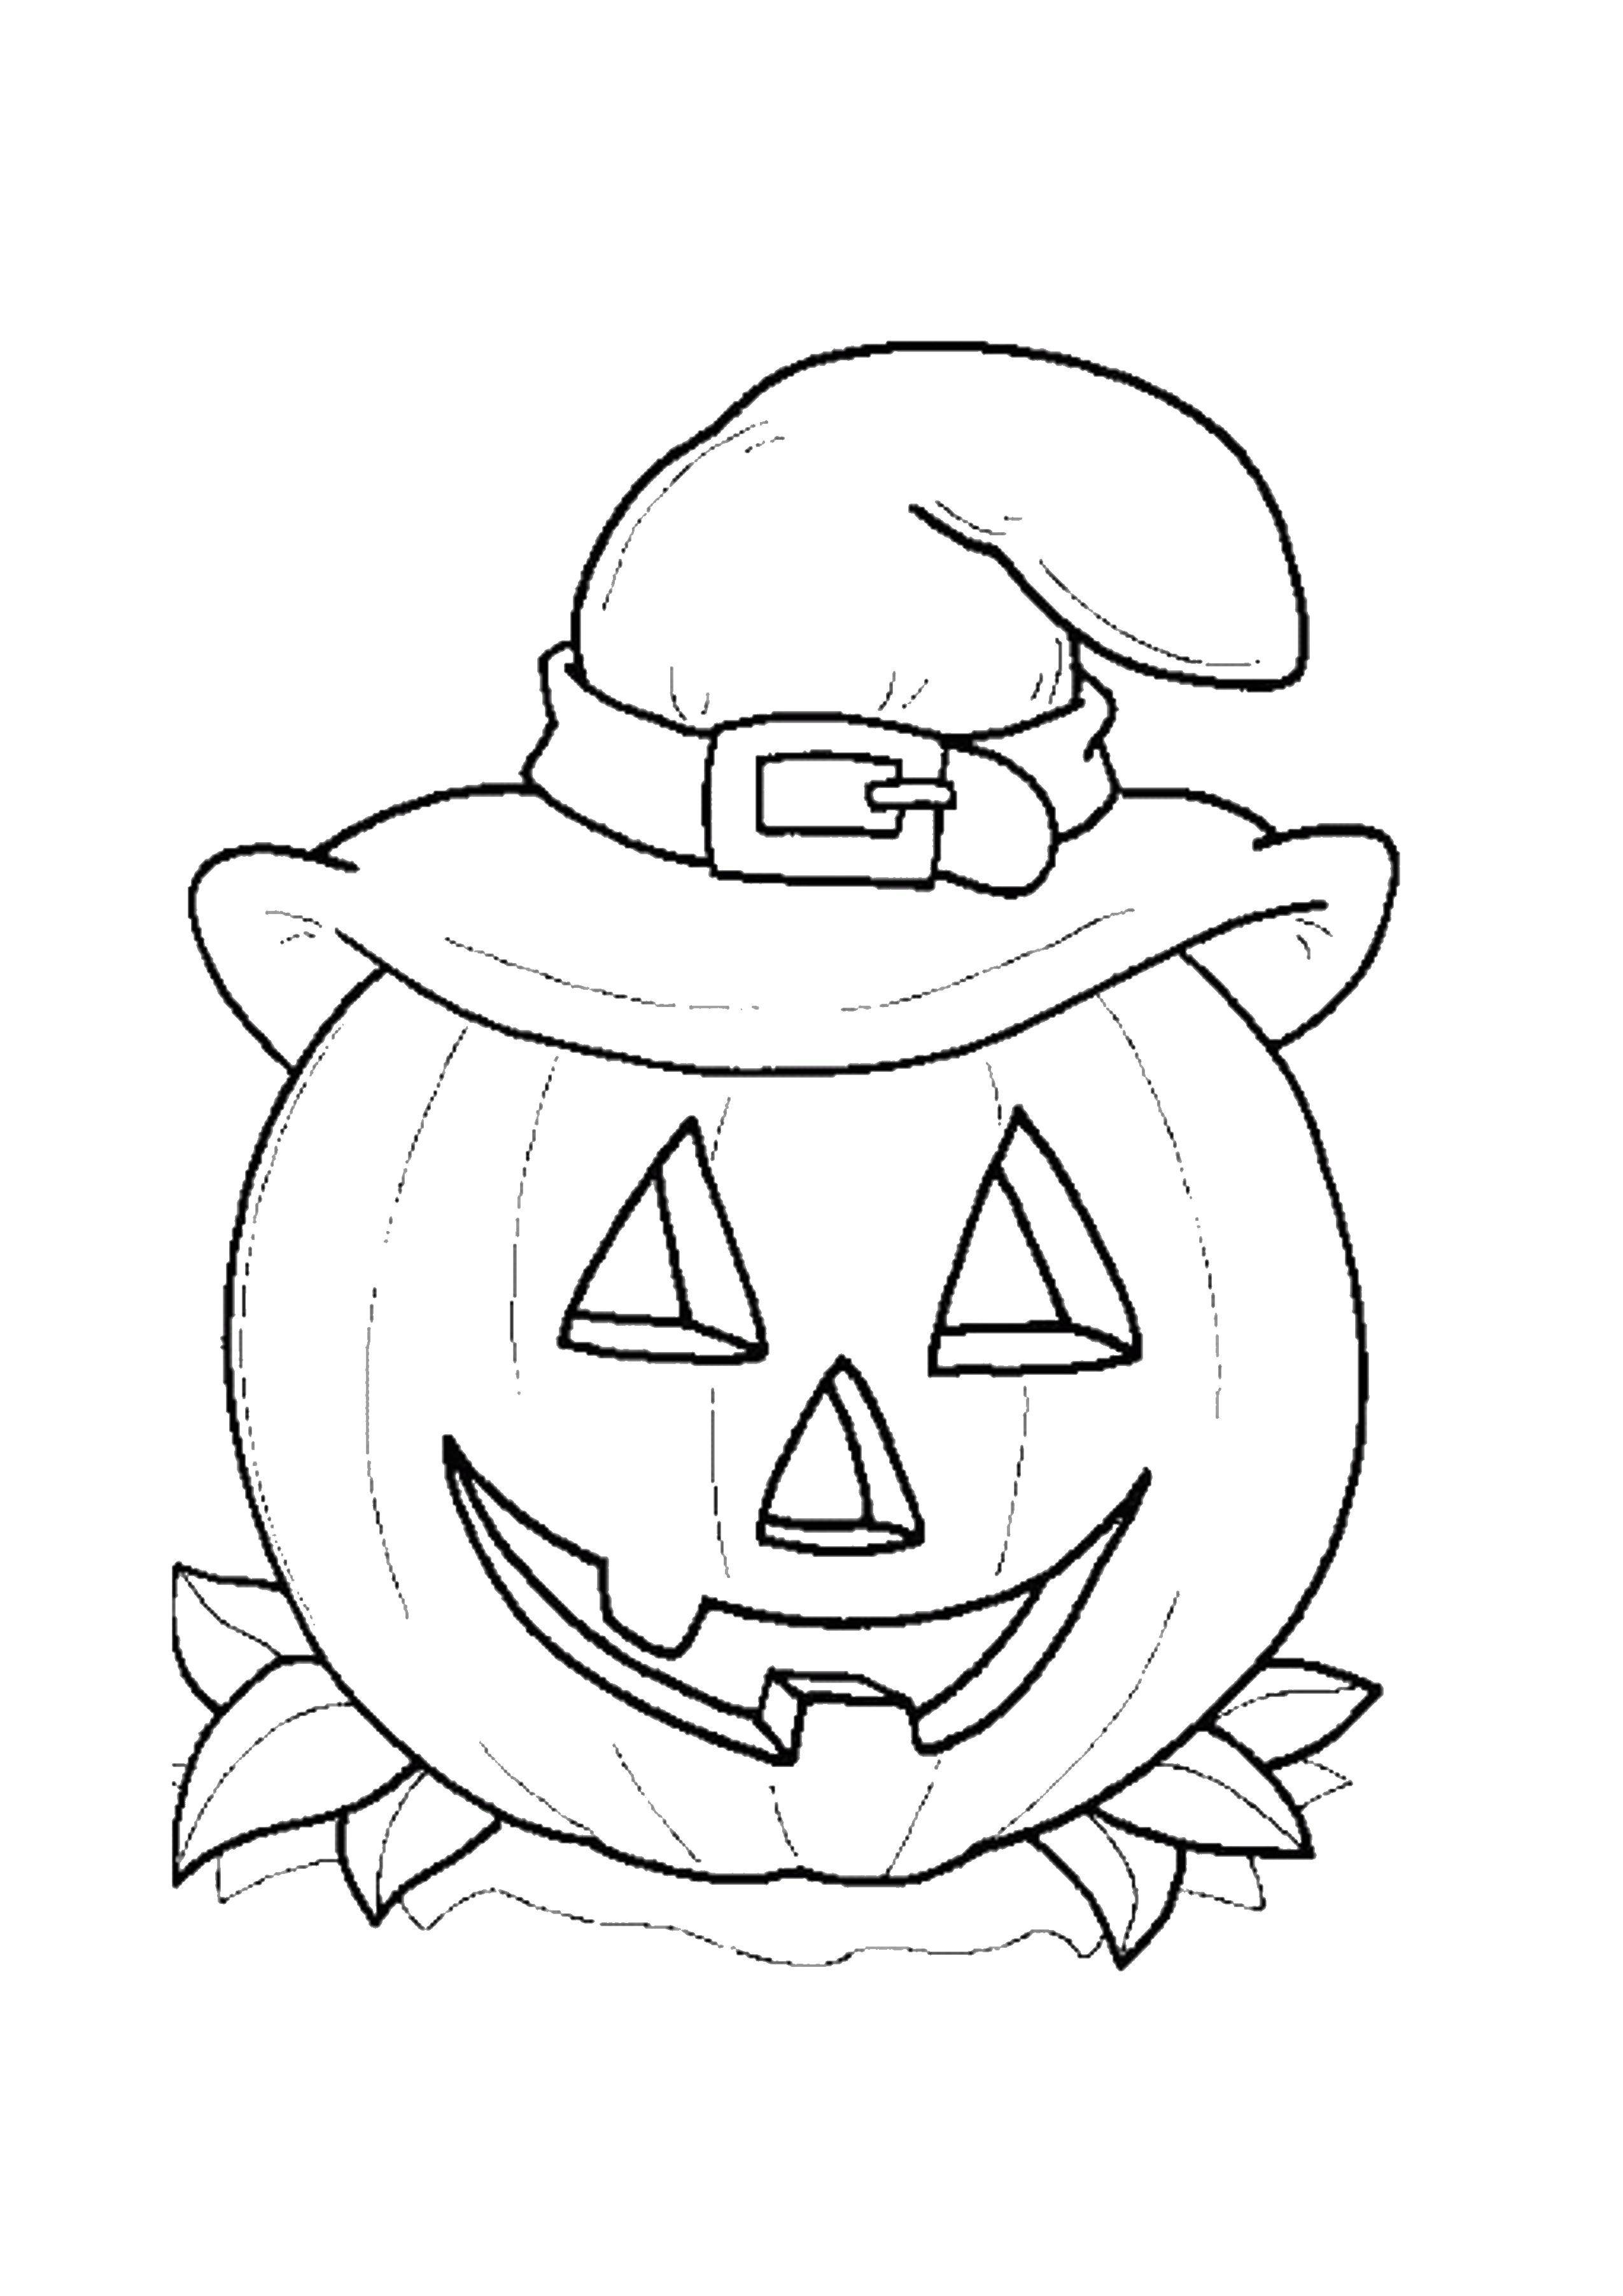 Coloring Pumpkin in the hat. Category Halloween. Tags:  pumpkin, hat, eyes, mouth.